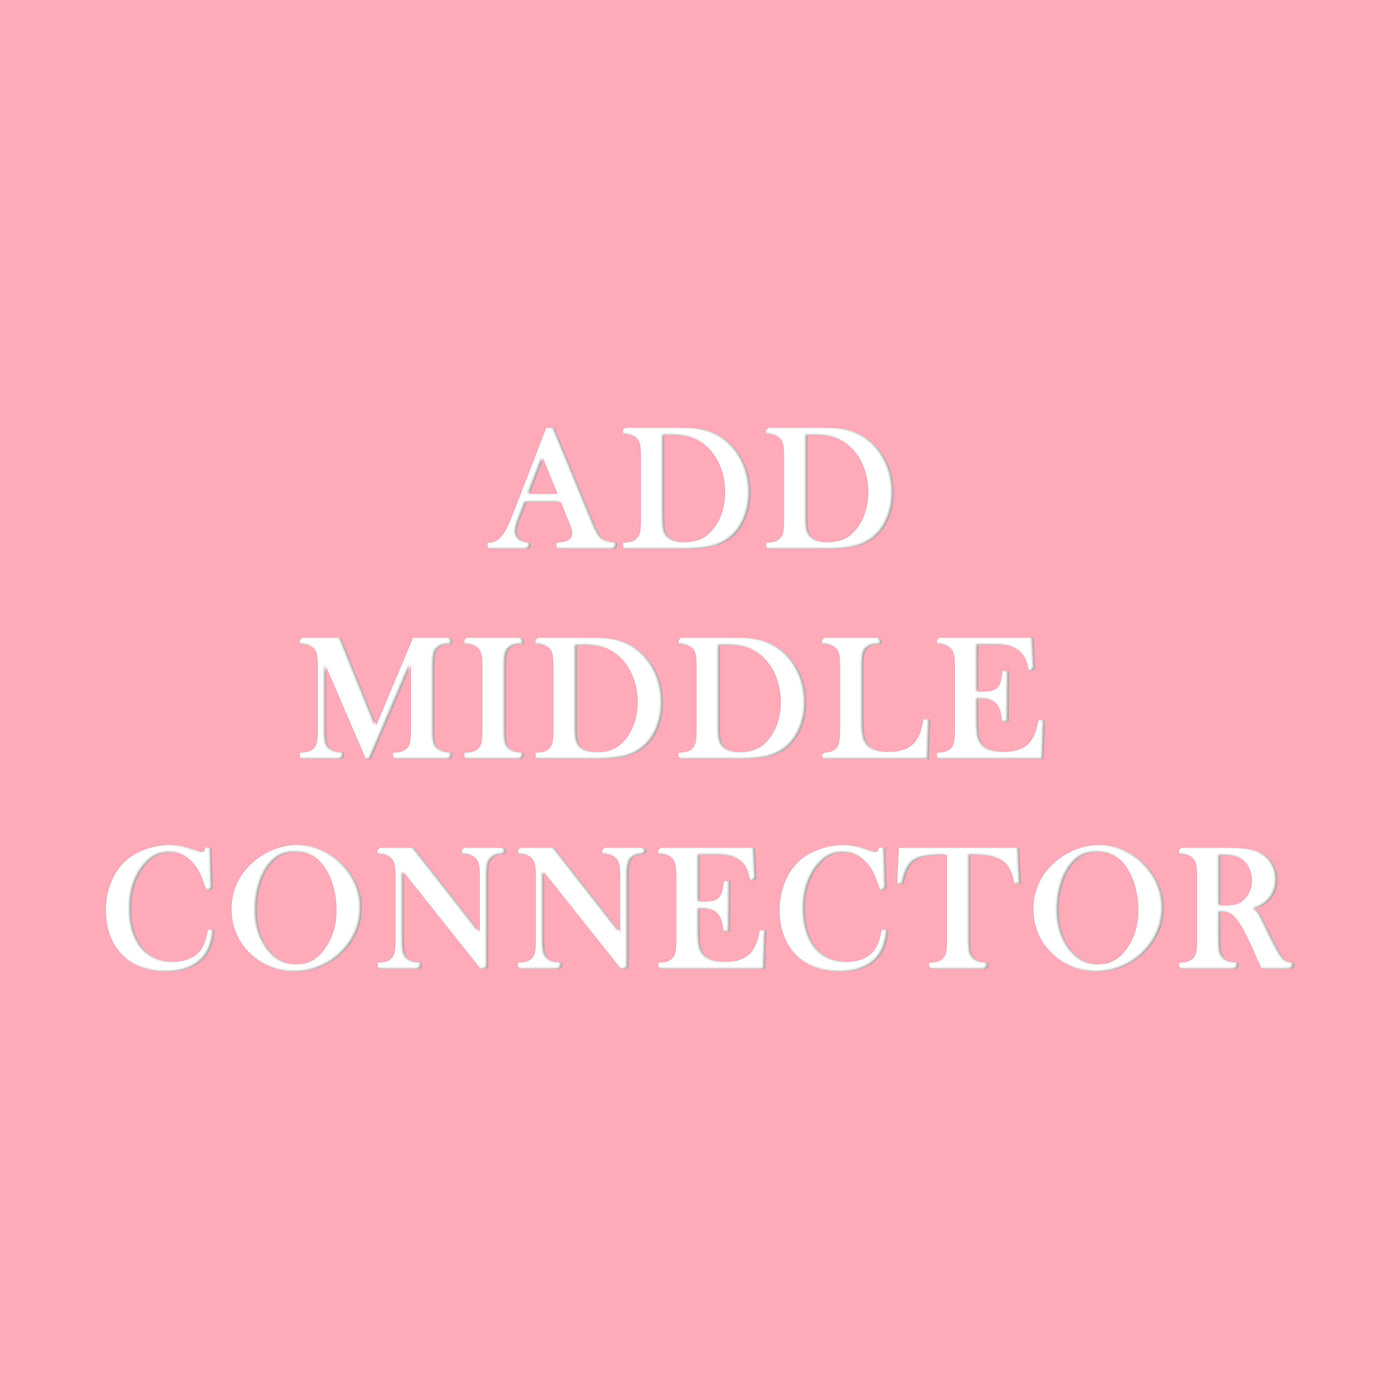 Middle Connector